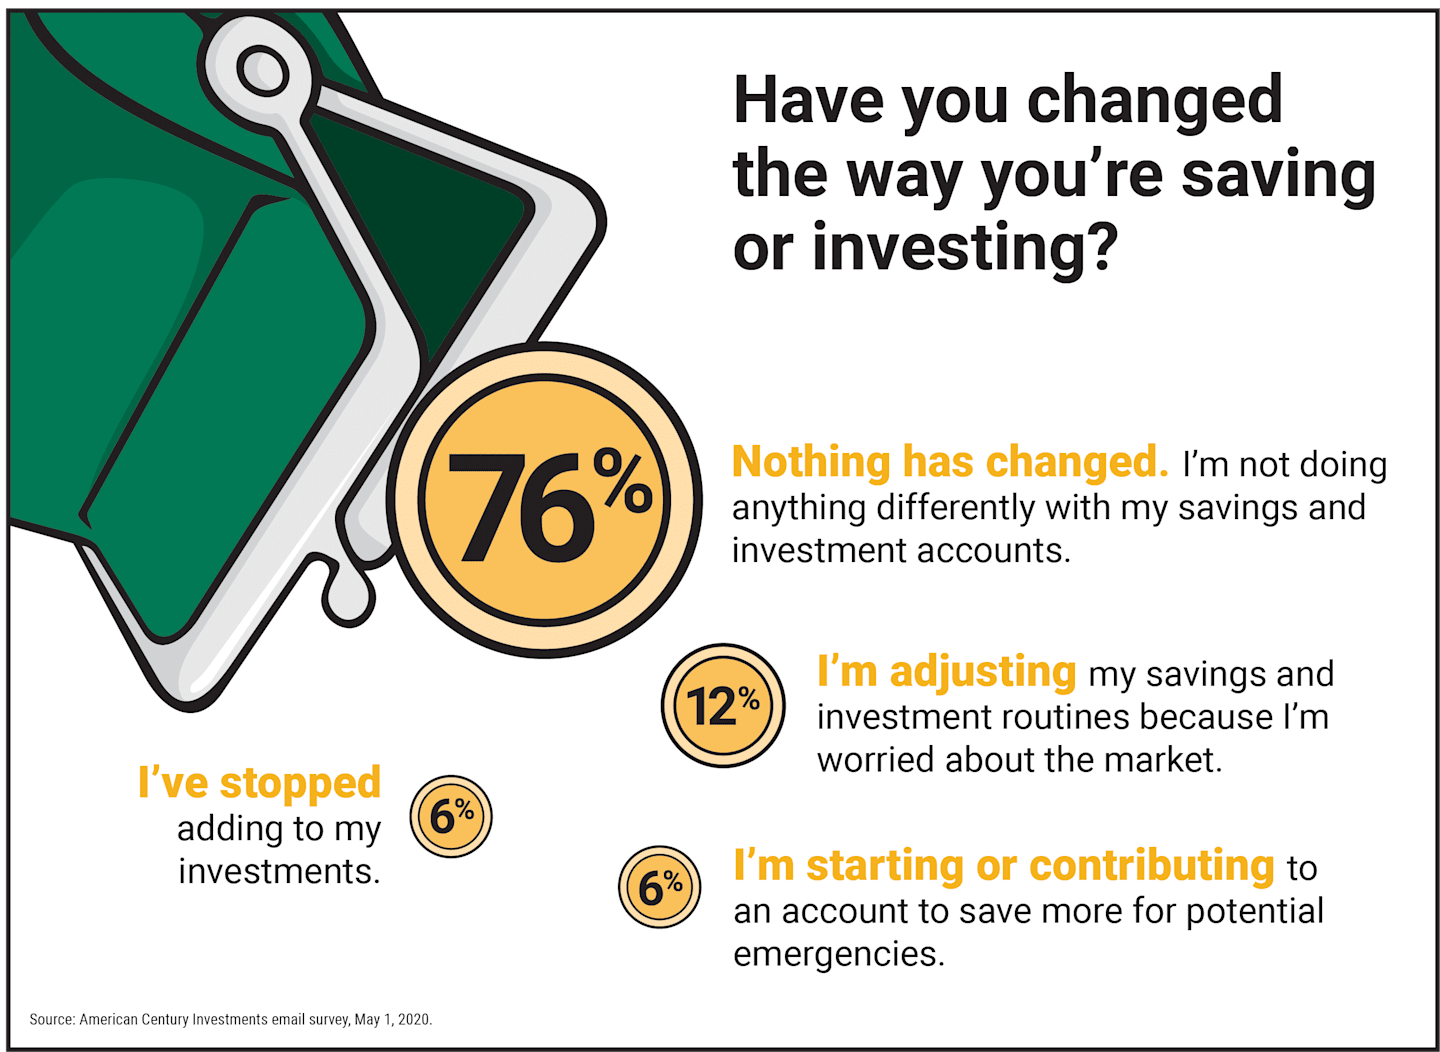 American Century Investments conducted an email survey on May 1st, 2020, asking, “Have you changed the way you’re saving or investing?